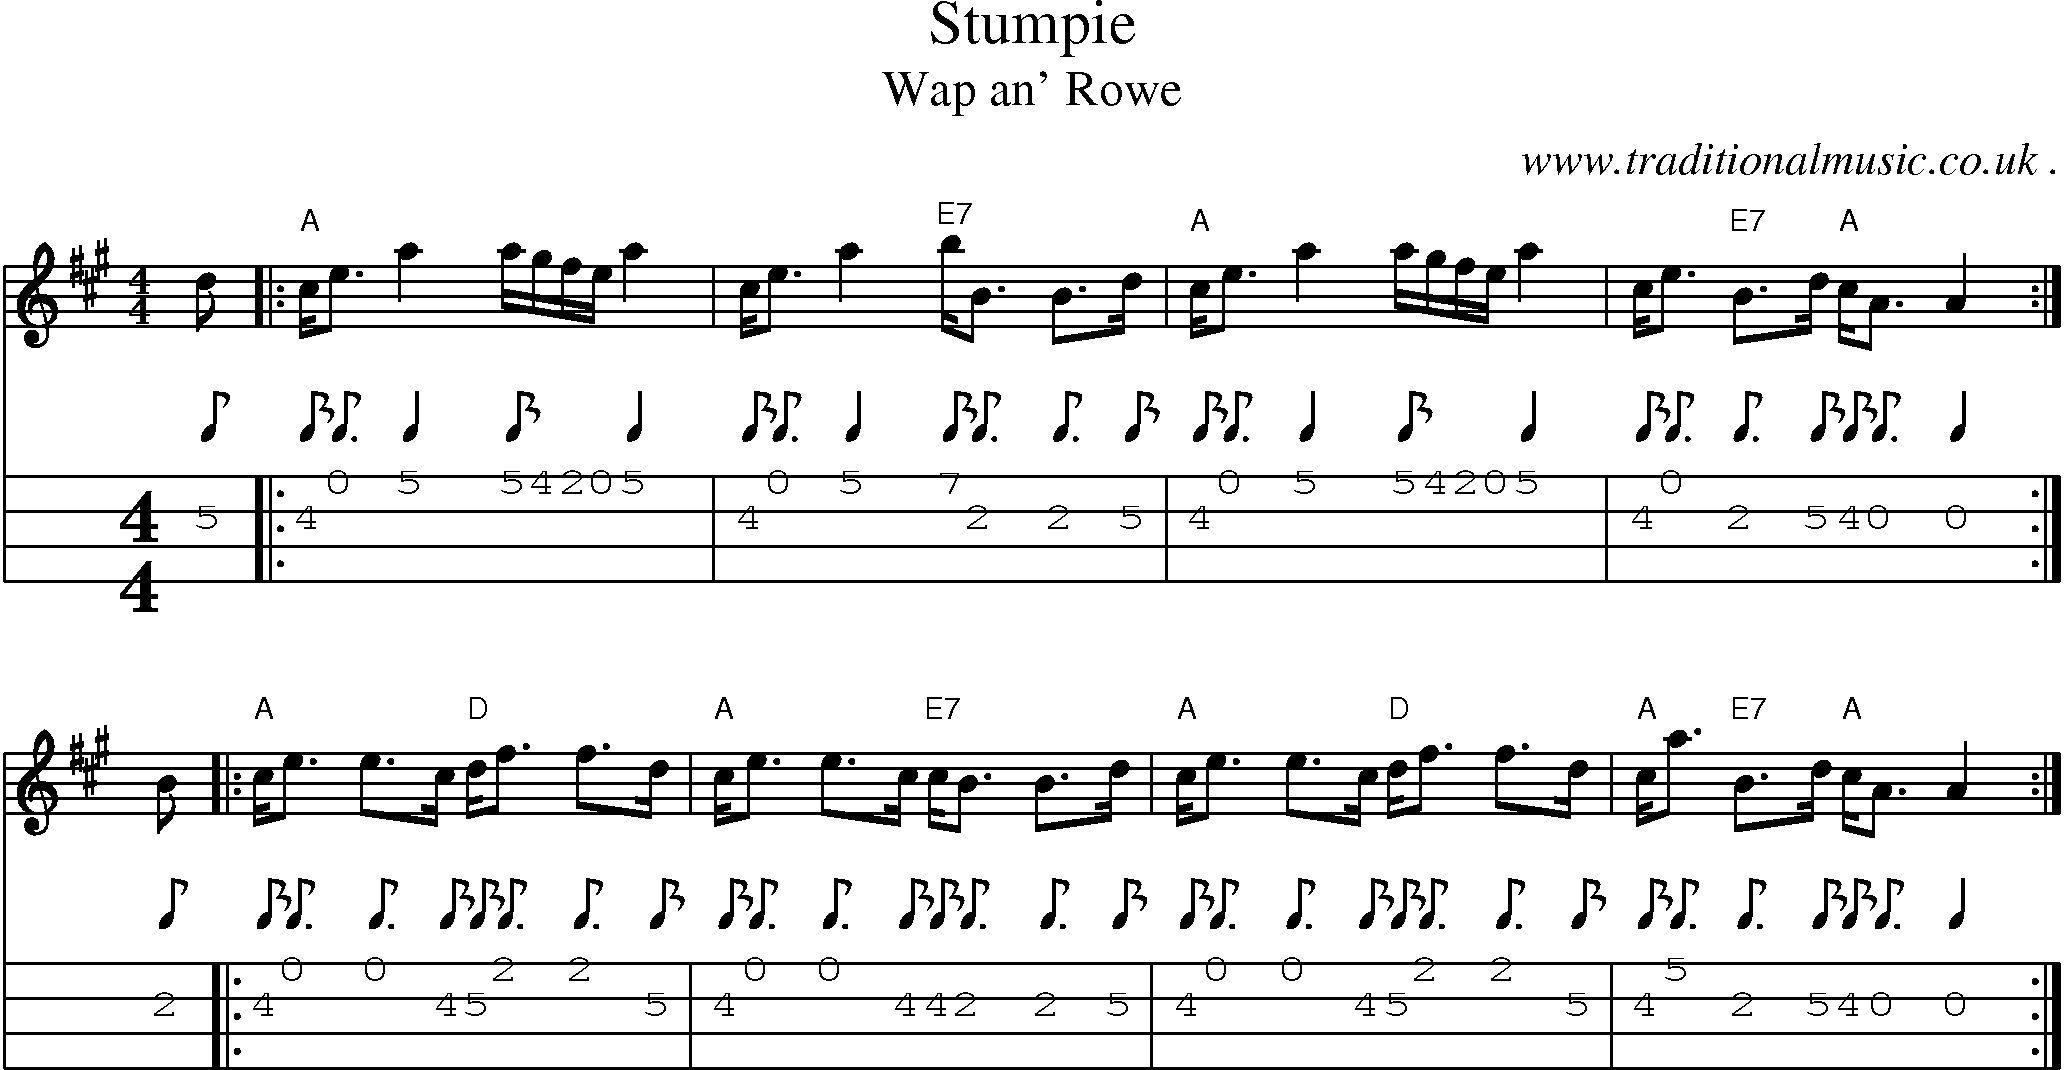 Sheet-music  score, Chords and Mandolin Tabs for Stumpie